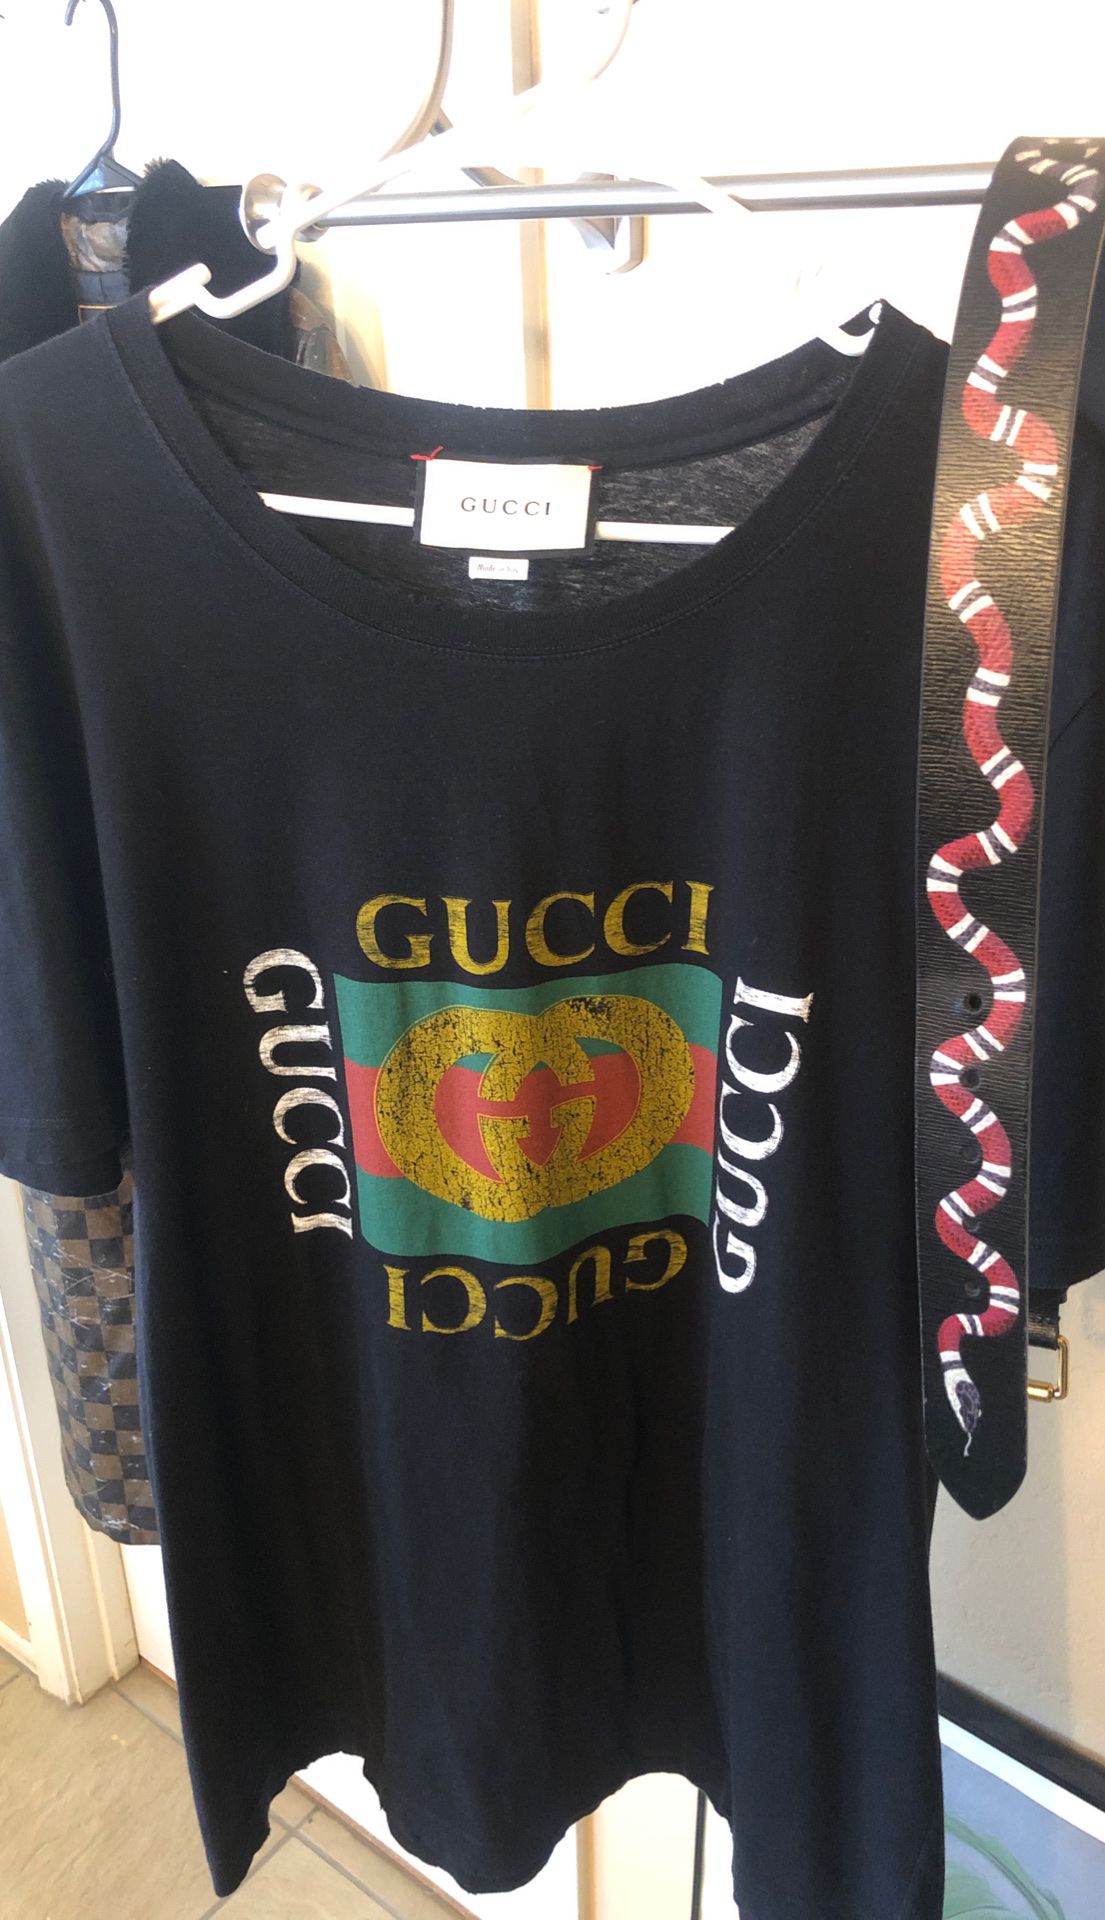 Authentic Gucci shirt and belt $500 both no trades